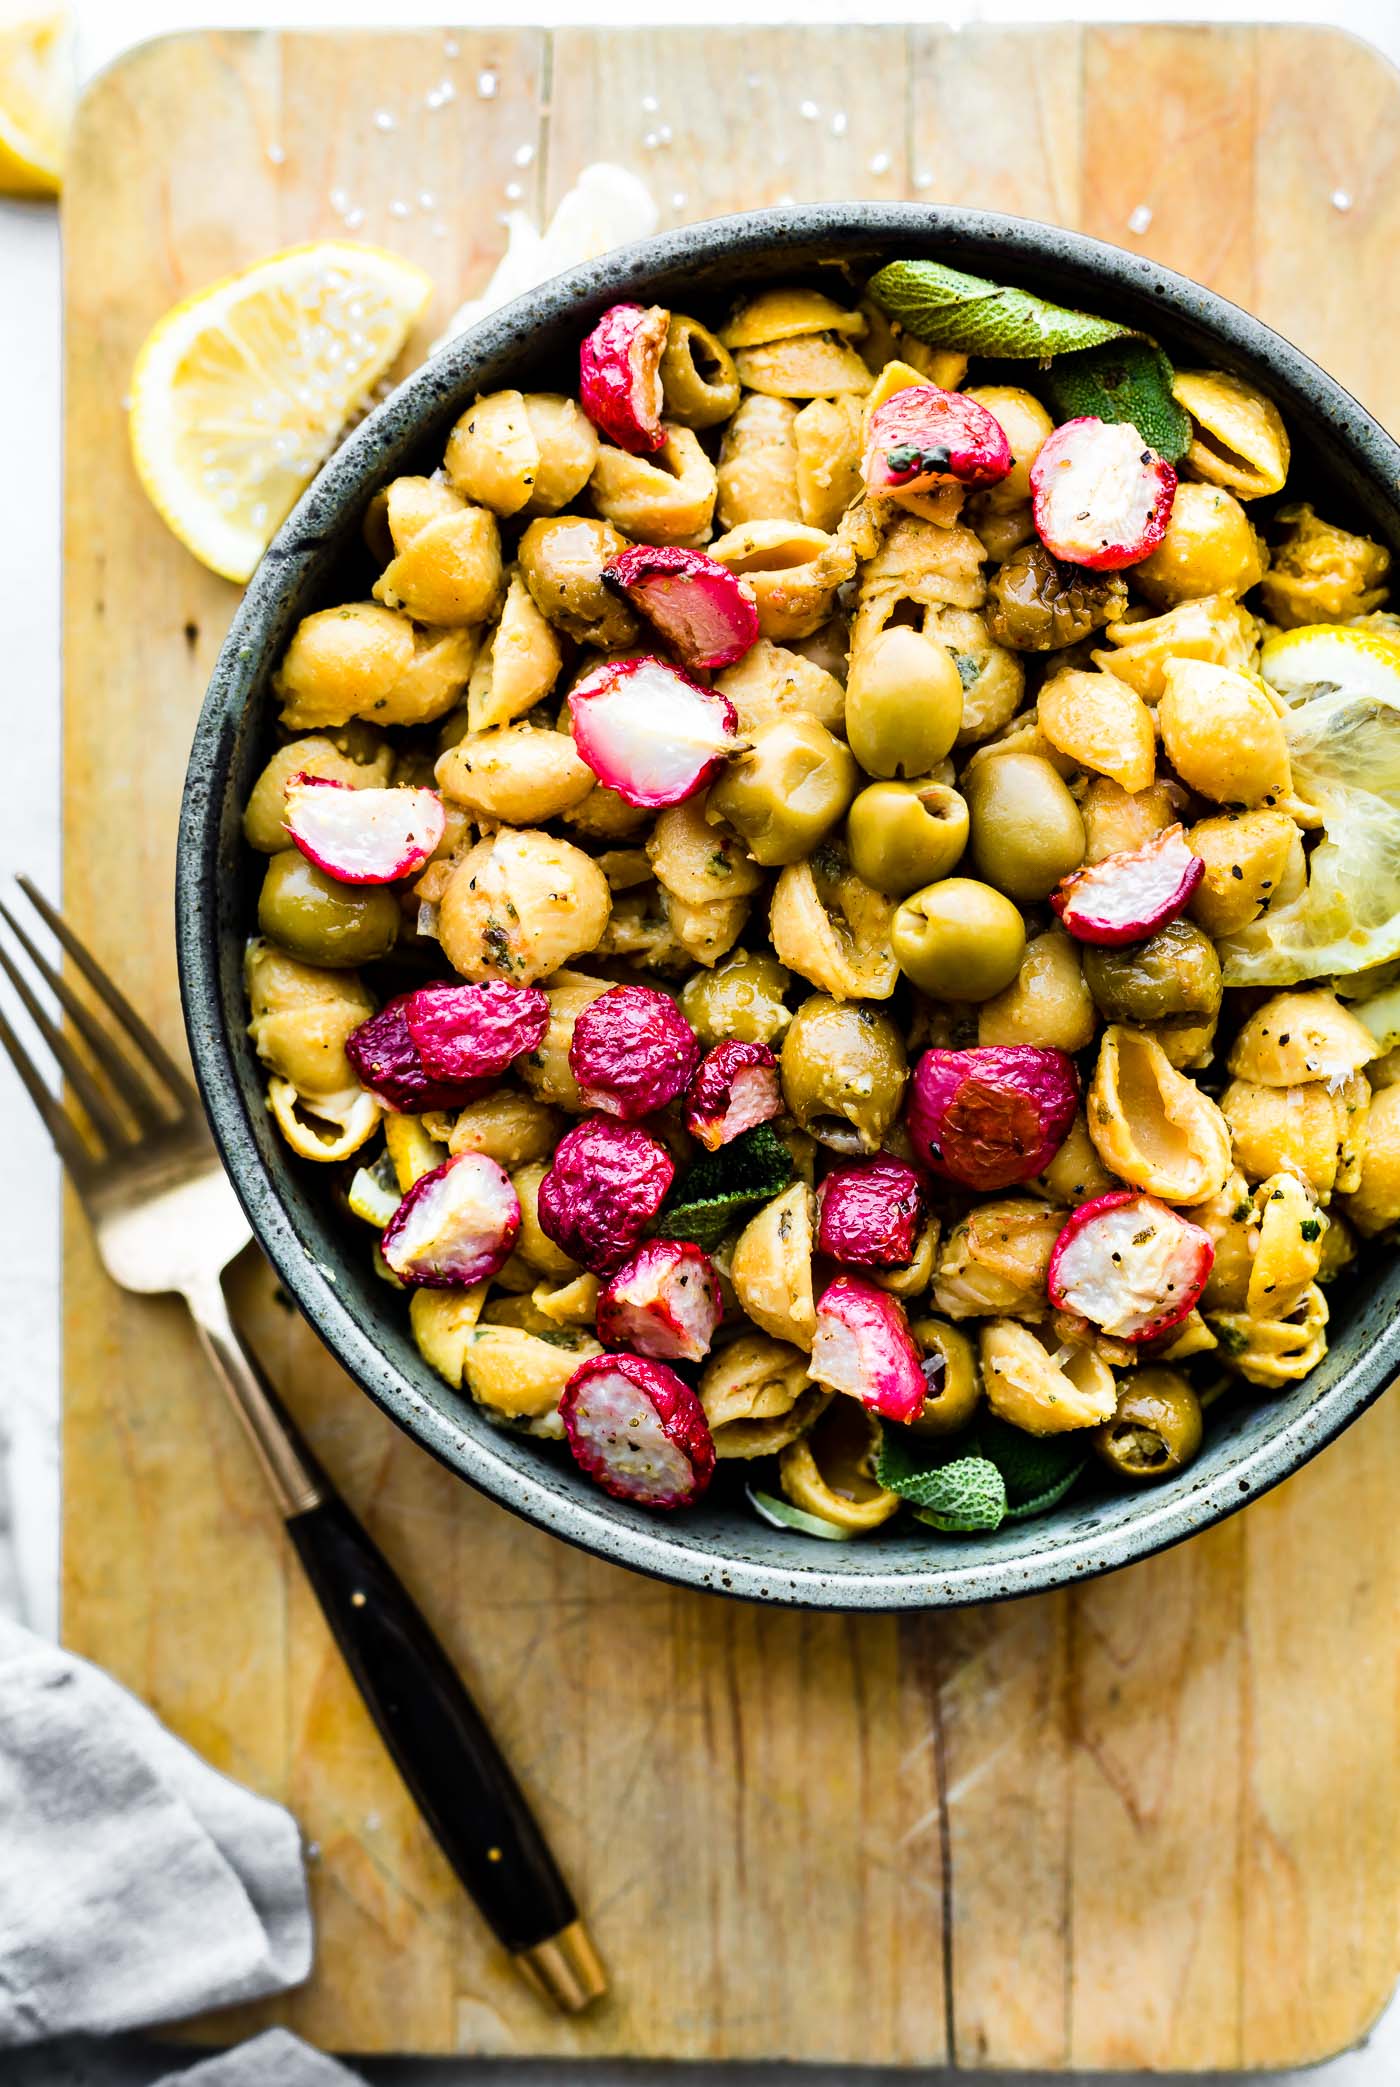 Overhead view roasted radish and chickpea pasta salad in stone bowl on wooden cutting board.